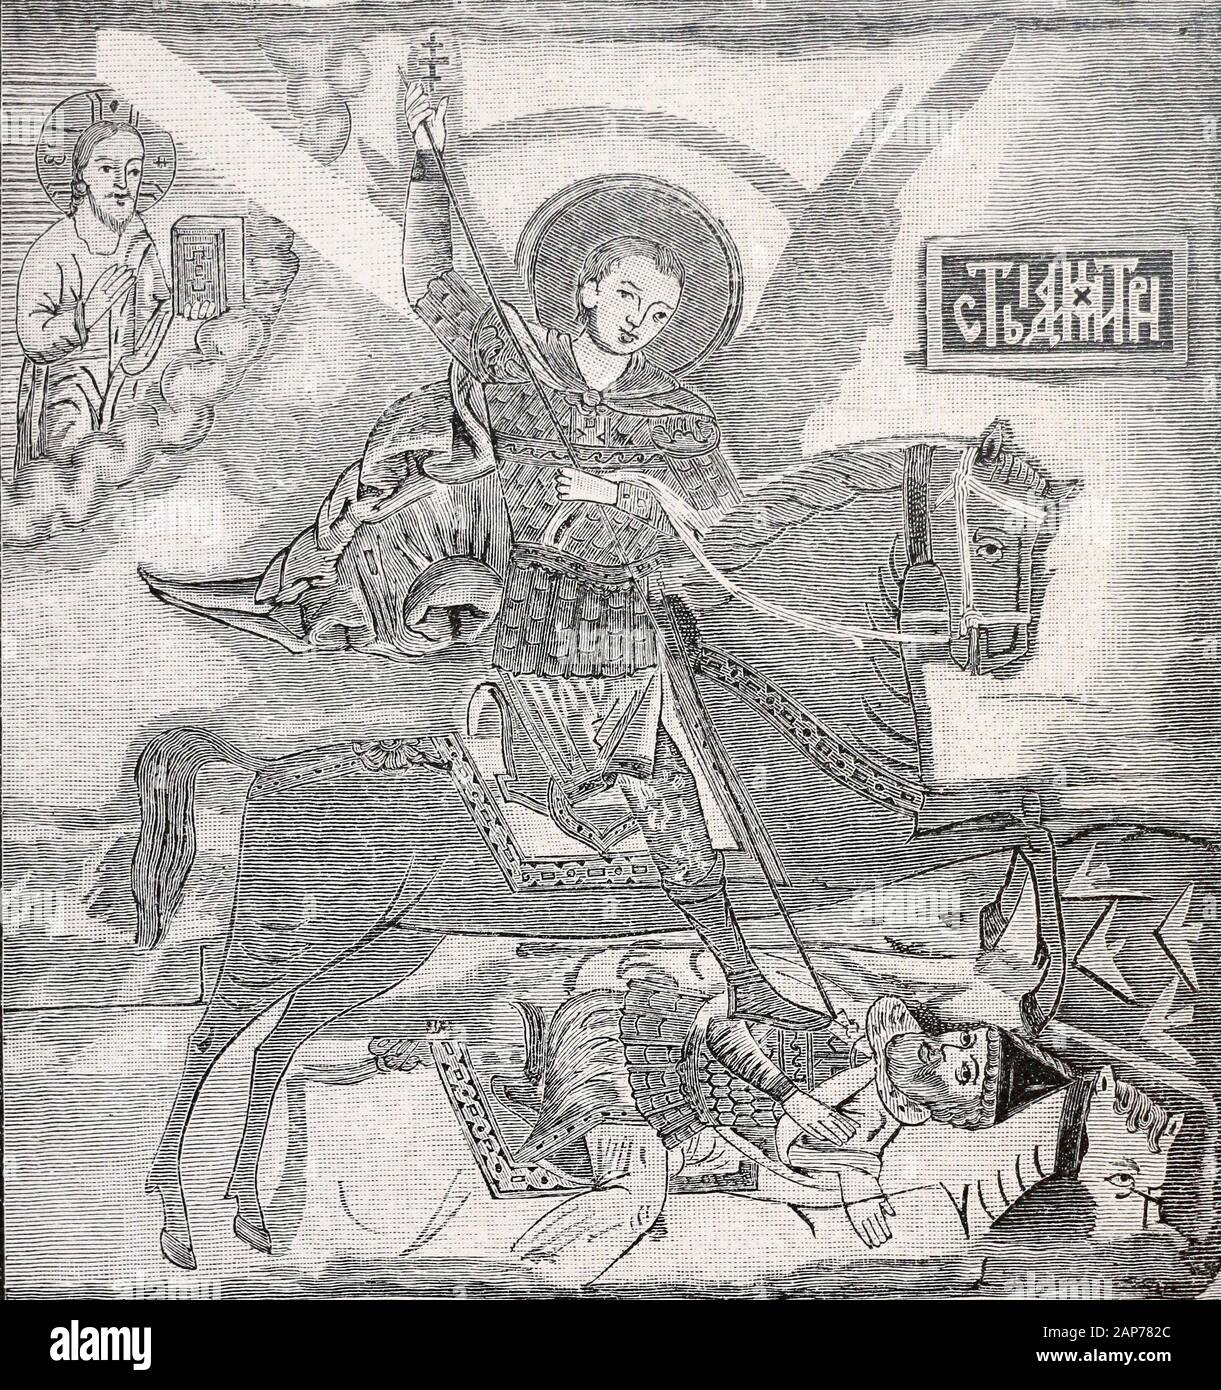 Banner of Yermak Timofeyevich. Medieval engraving. Yermak Timofeyevich born between 1532 and 1542 – August 5 or 6, 1585) was a Cossack ataman and is today a hero in Russian folklore and myths. In the reign of Tsar Ivan the Terrible Yermak started the Russian conquest of Siberia. Stock Photo